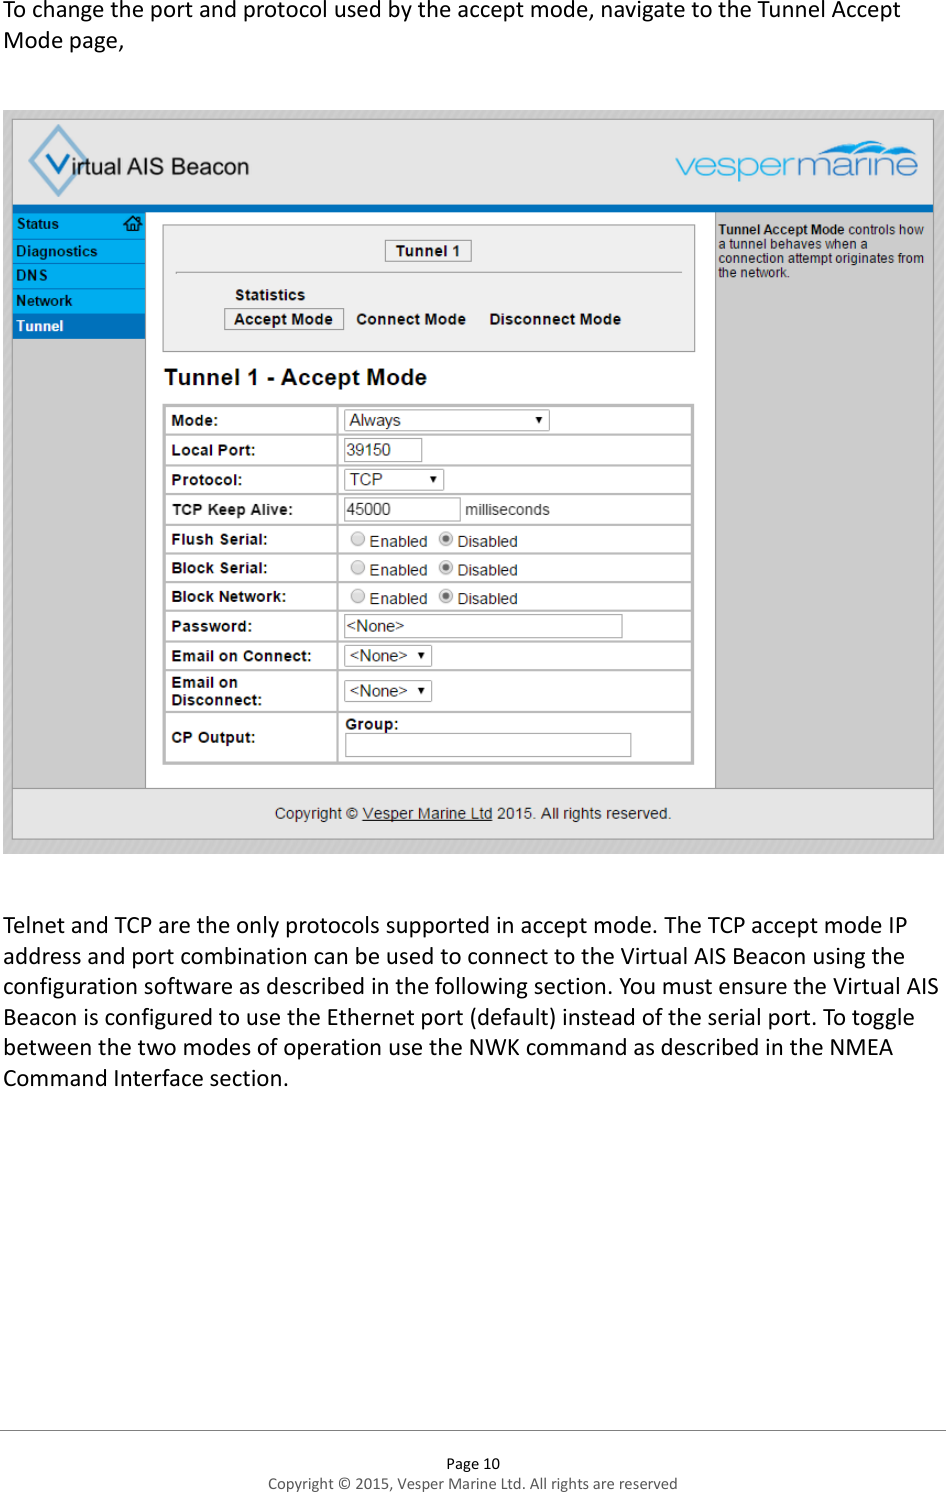  Page 10 Copyright © 2015, Vesper Marine Ltd. All rights are reserved  To change the port and protocol used by the accept mode, navigate to the Tunnel Accept Mode page,    Telnet and TCP are the only protocols supported in accept mode. The TCP accept mode IP address and port combination can be used to connect to the Virtual AIS Beacon using the configuration software as described in the following section. You must ensure the Virtual AIS Beacon is configured to use the Ethernet port (default) instead of the serial port. To toggle between the two modes of operation use the NWK command as described in the NMEA Command Interface section.  